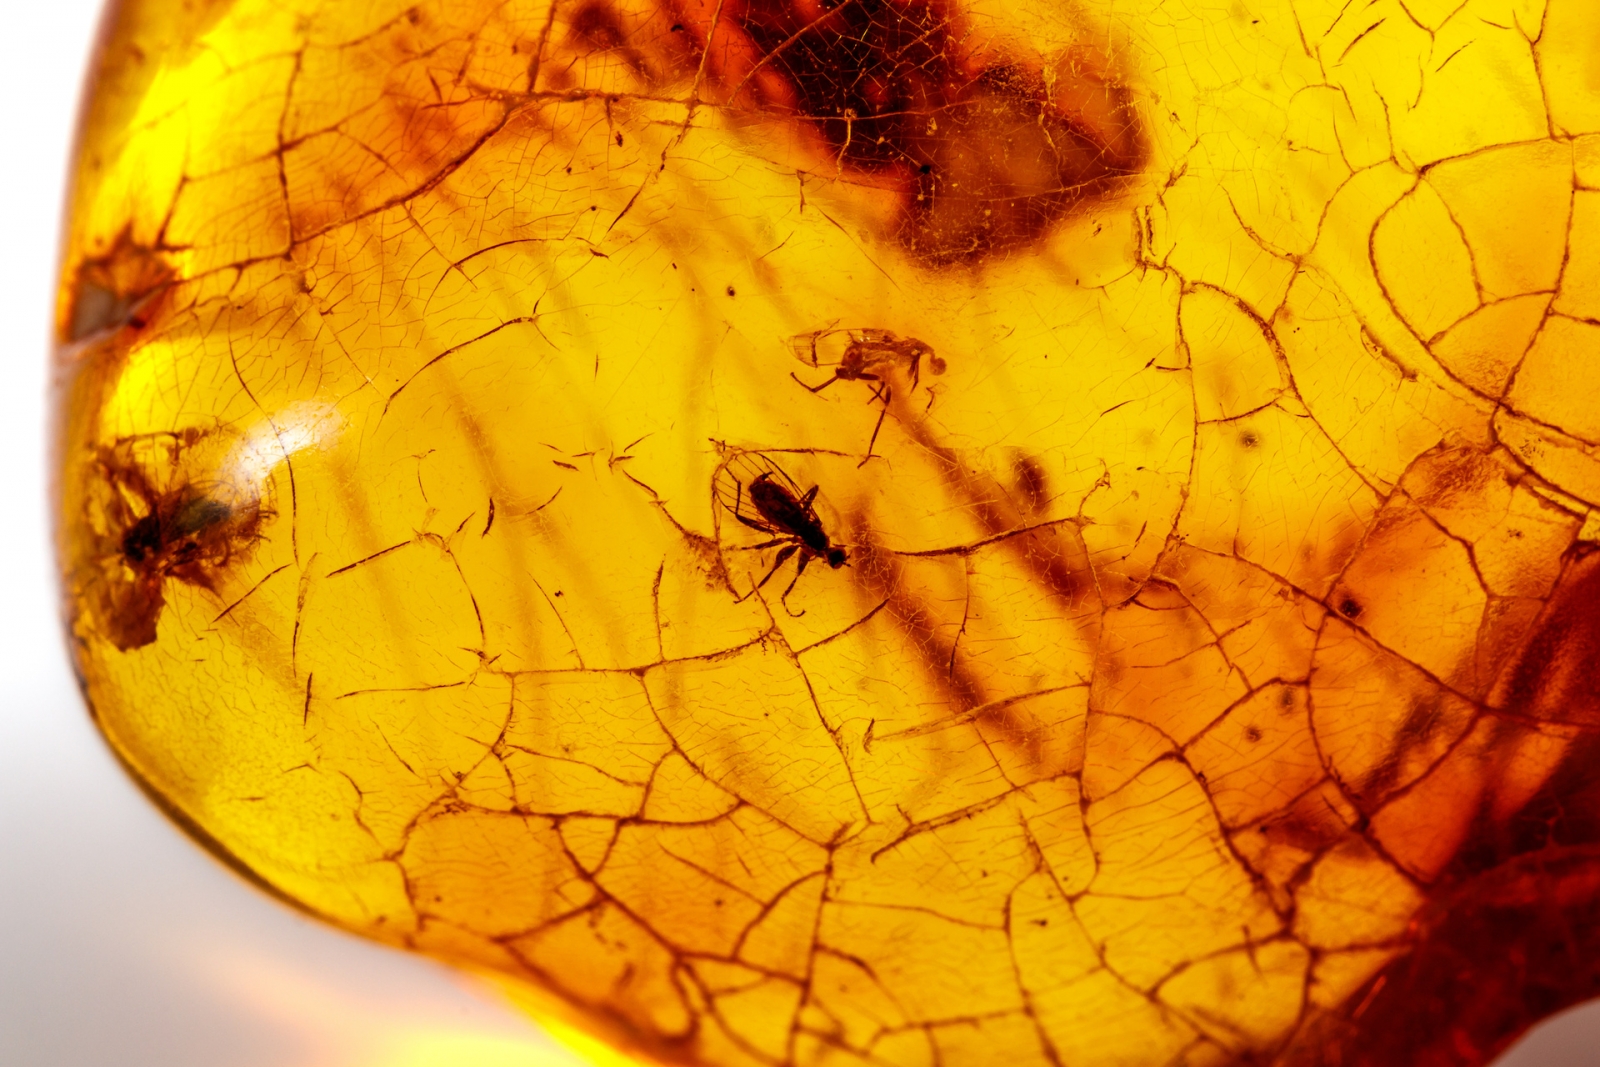 Macro stone mineral amber with insects, flies and beetles